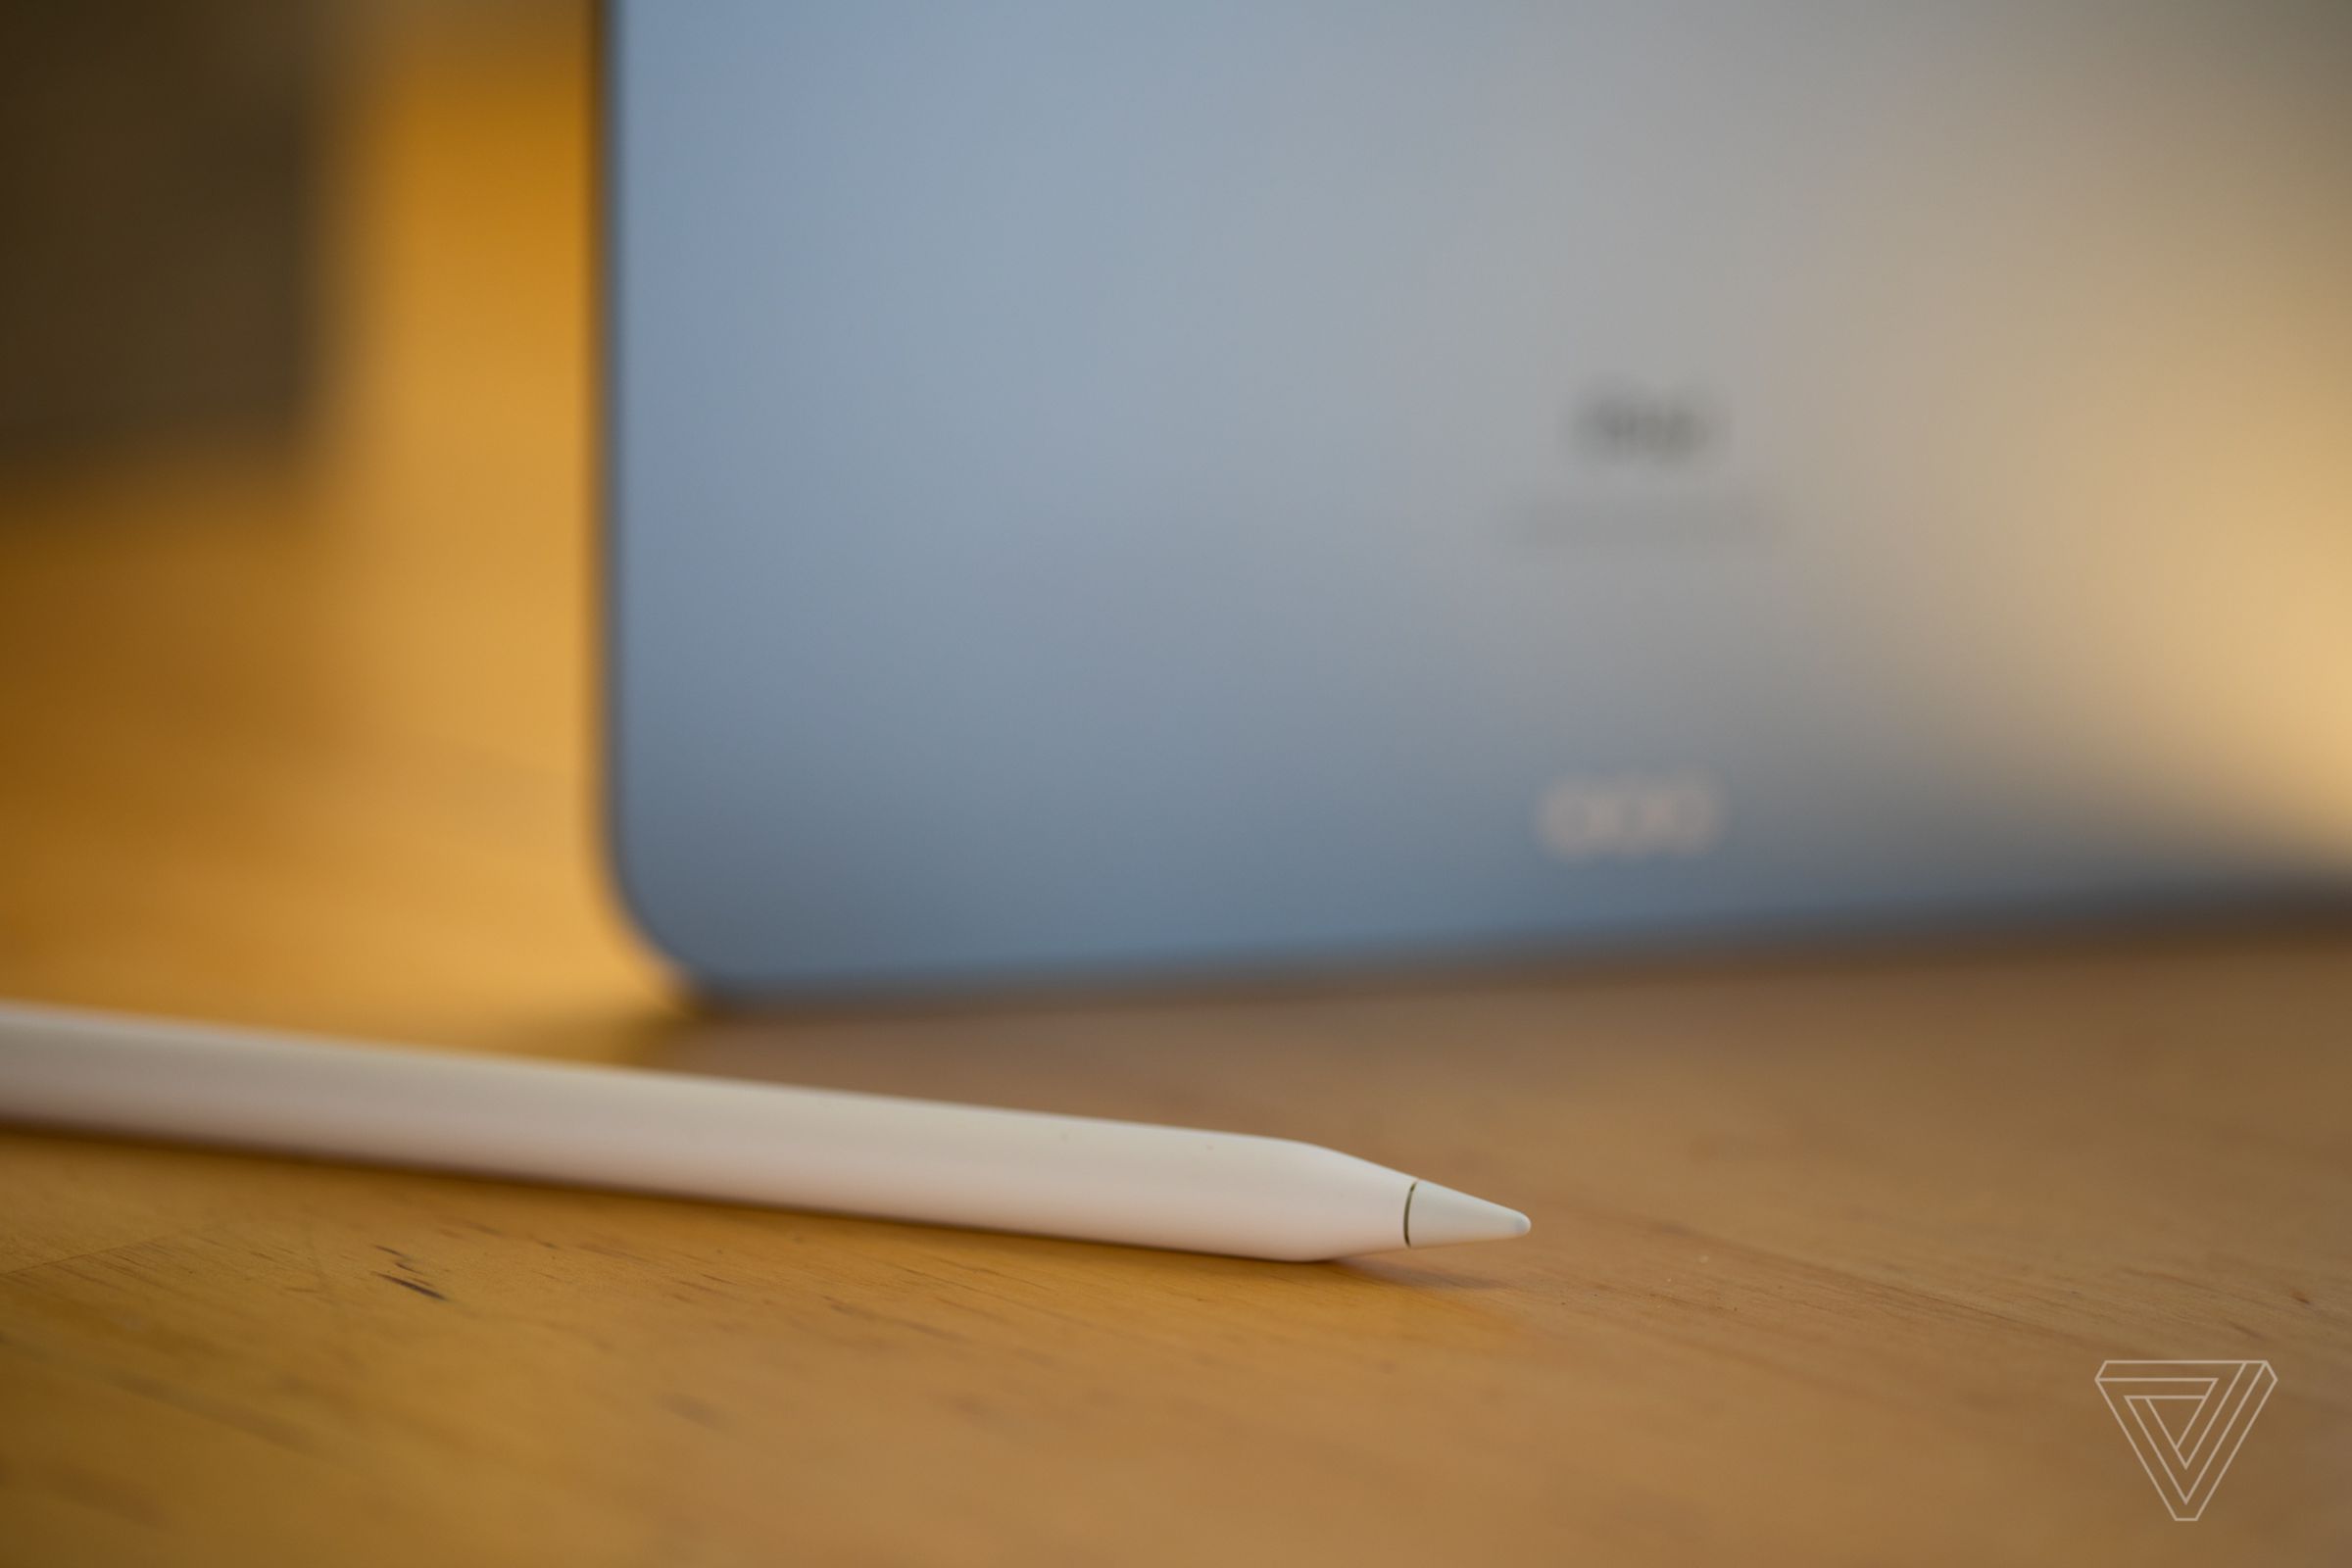 It also (only) works with the newer style of the Apple Pencil